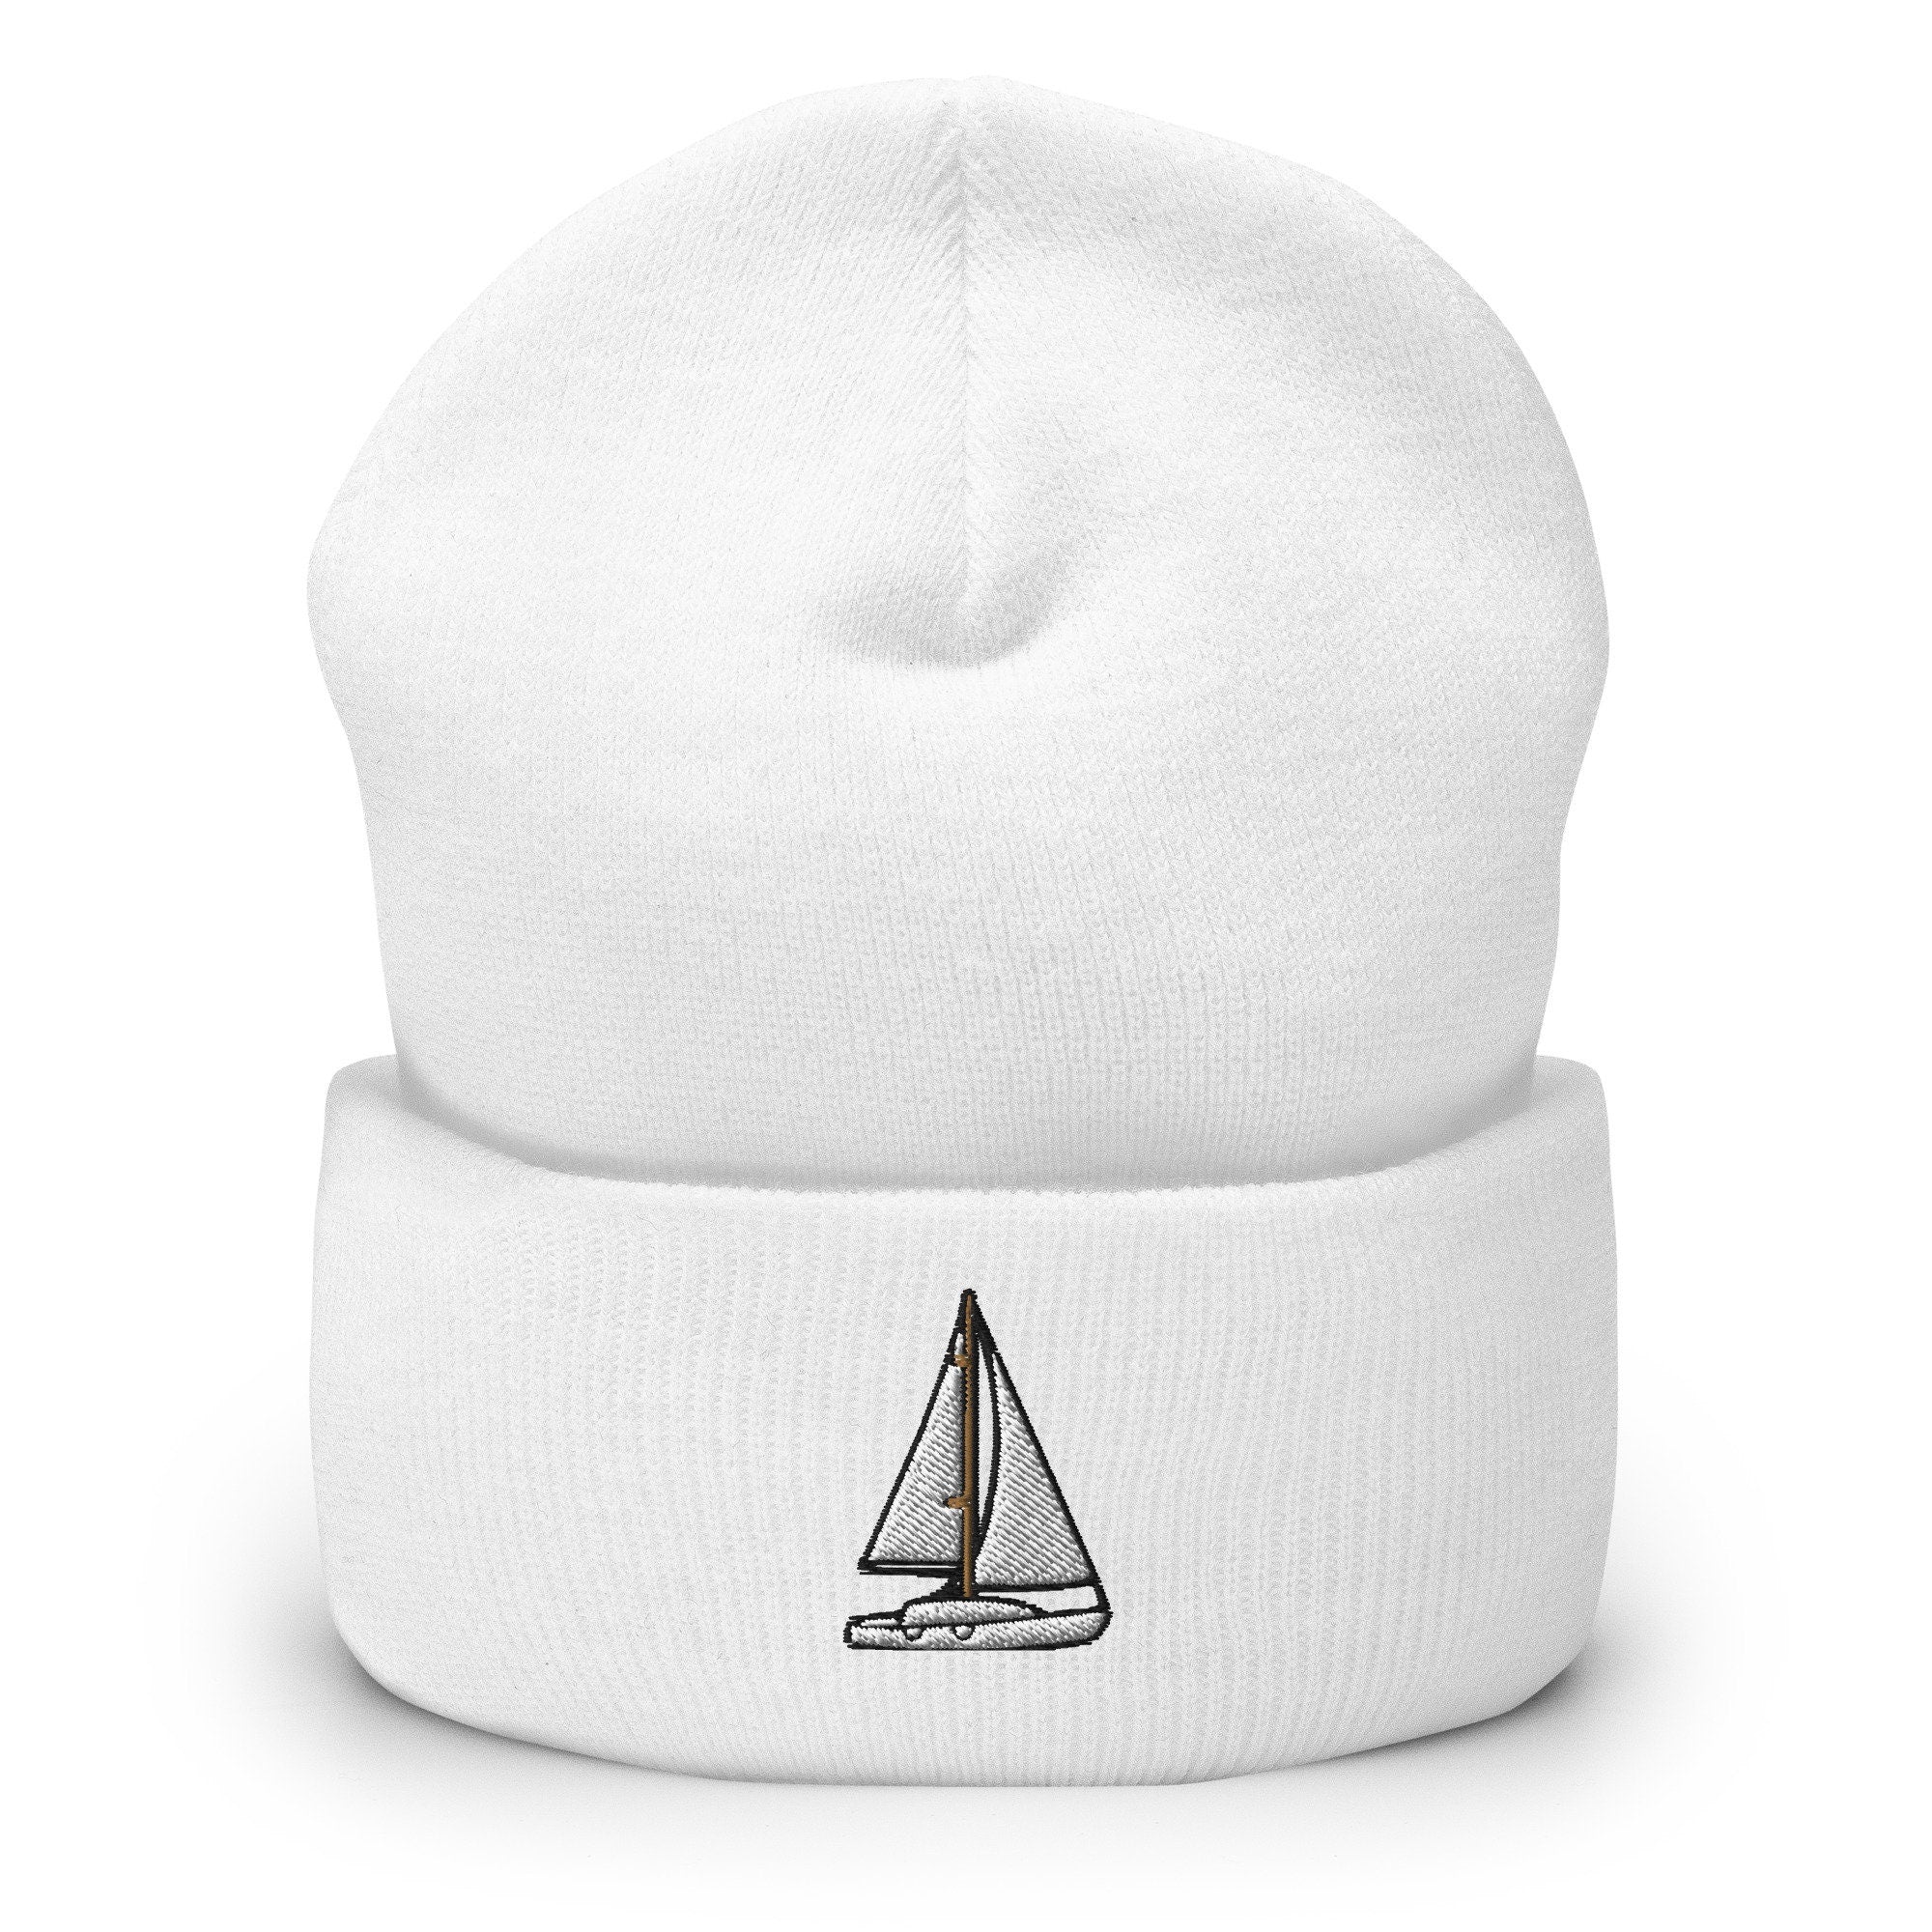 Boat Sailing Sailboat Yacht Embroidered Beanie, Handmade Cuffed Knit Unisex Slouchy Adult Winter Hat Cap Gift